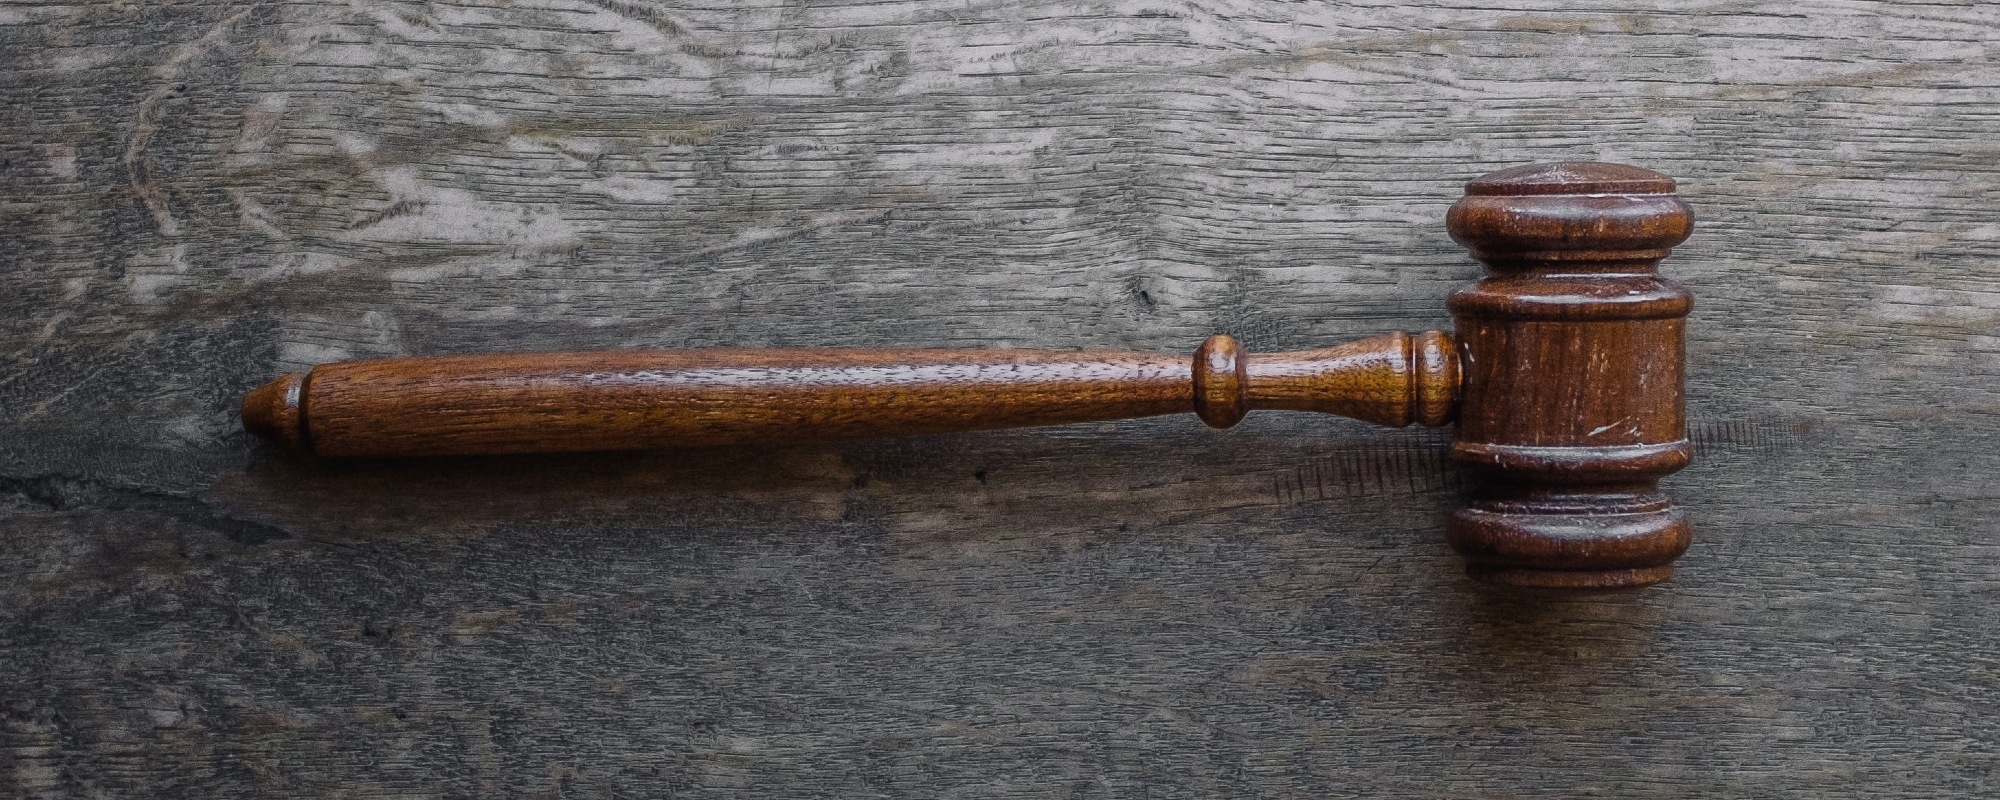 A wooden gavel lies on a wooden table (image by Wesley Tingey, Unsplash)